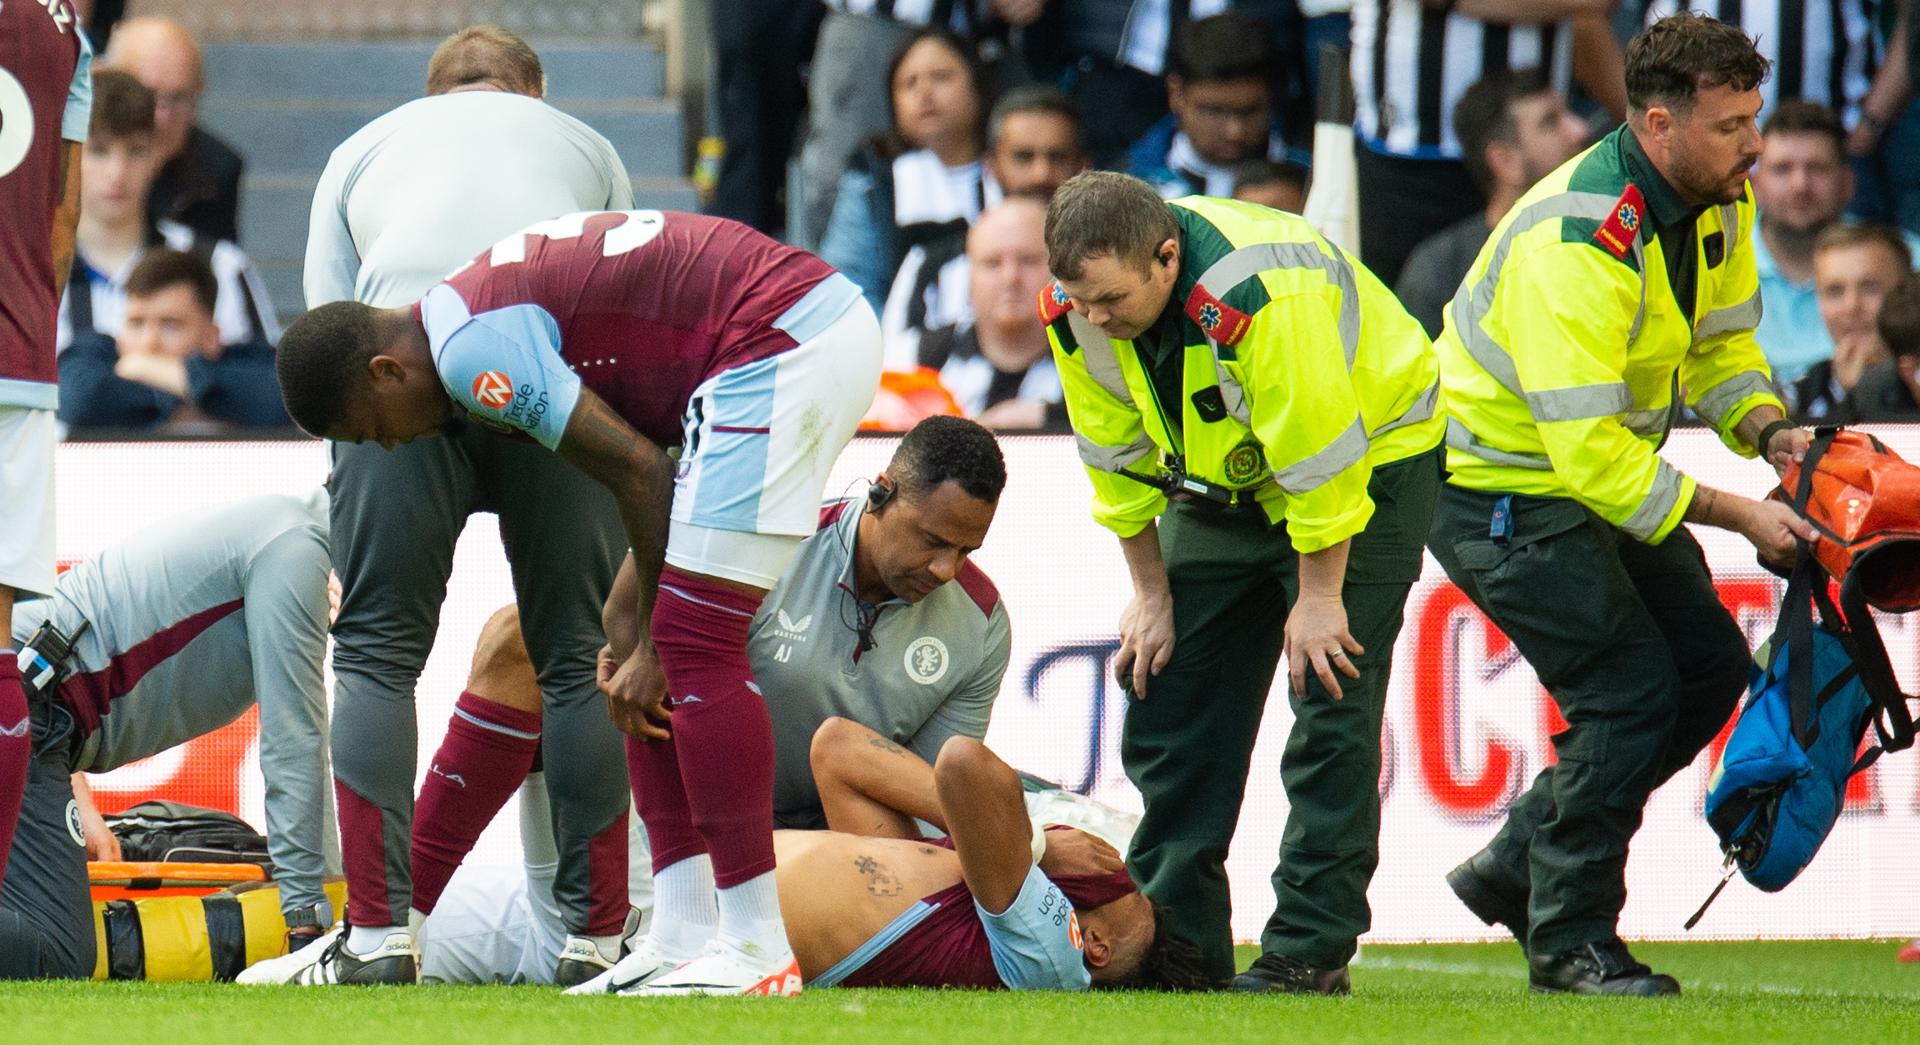 Aston Villa's Tyrone Mings suffered an apparently serious knee injury during Premier League action at St. James' Park in Newcastle, United Kingdom, on 12 August 2023 against Newcastle United and had to be taken off the field on a stretcher. Newcastle won 5-1. EFE/EPA/PETER POWELL.
